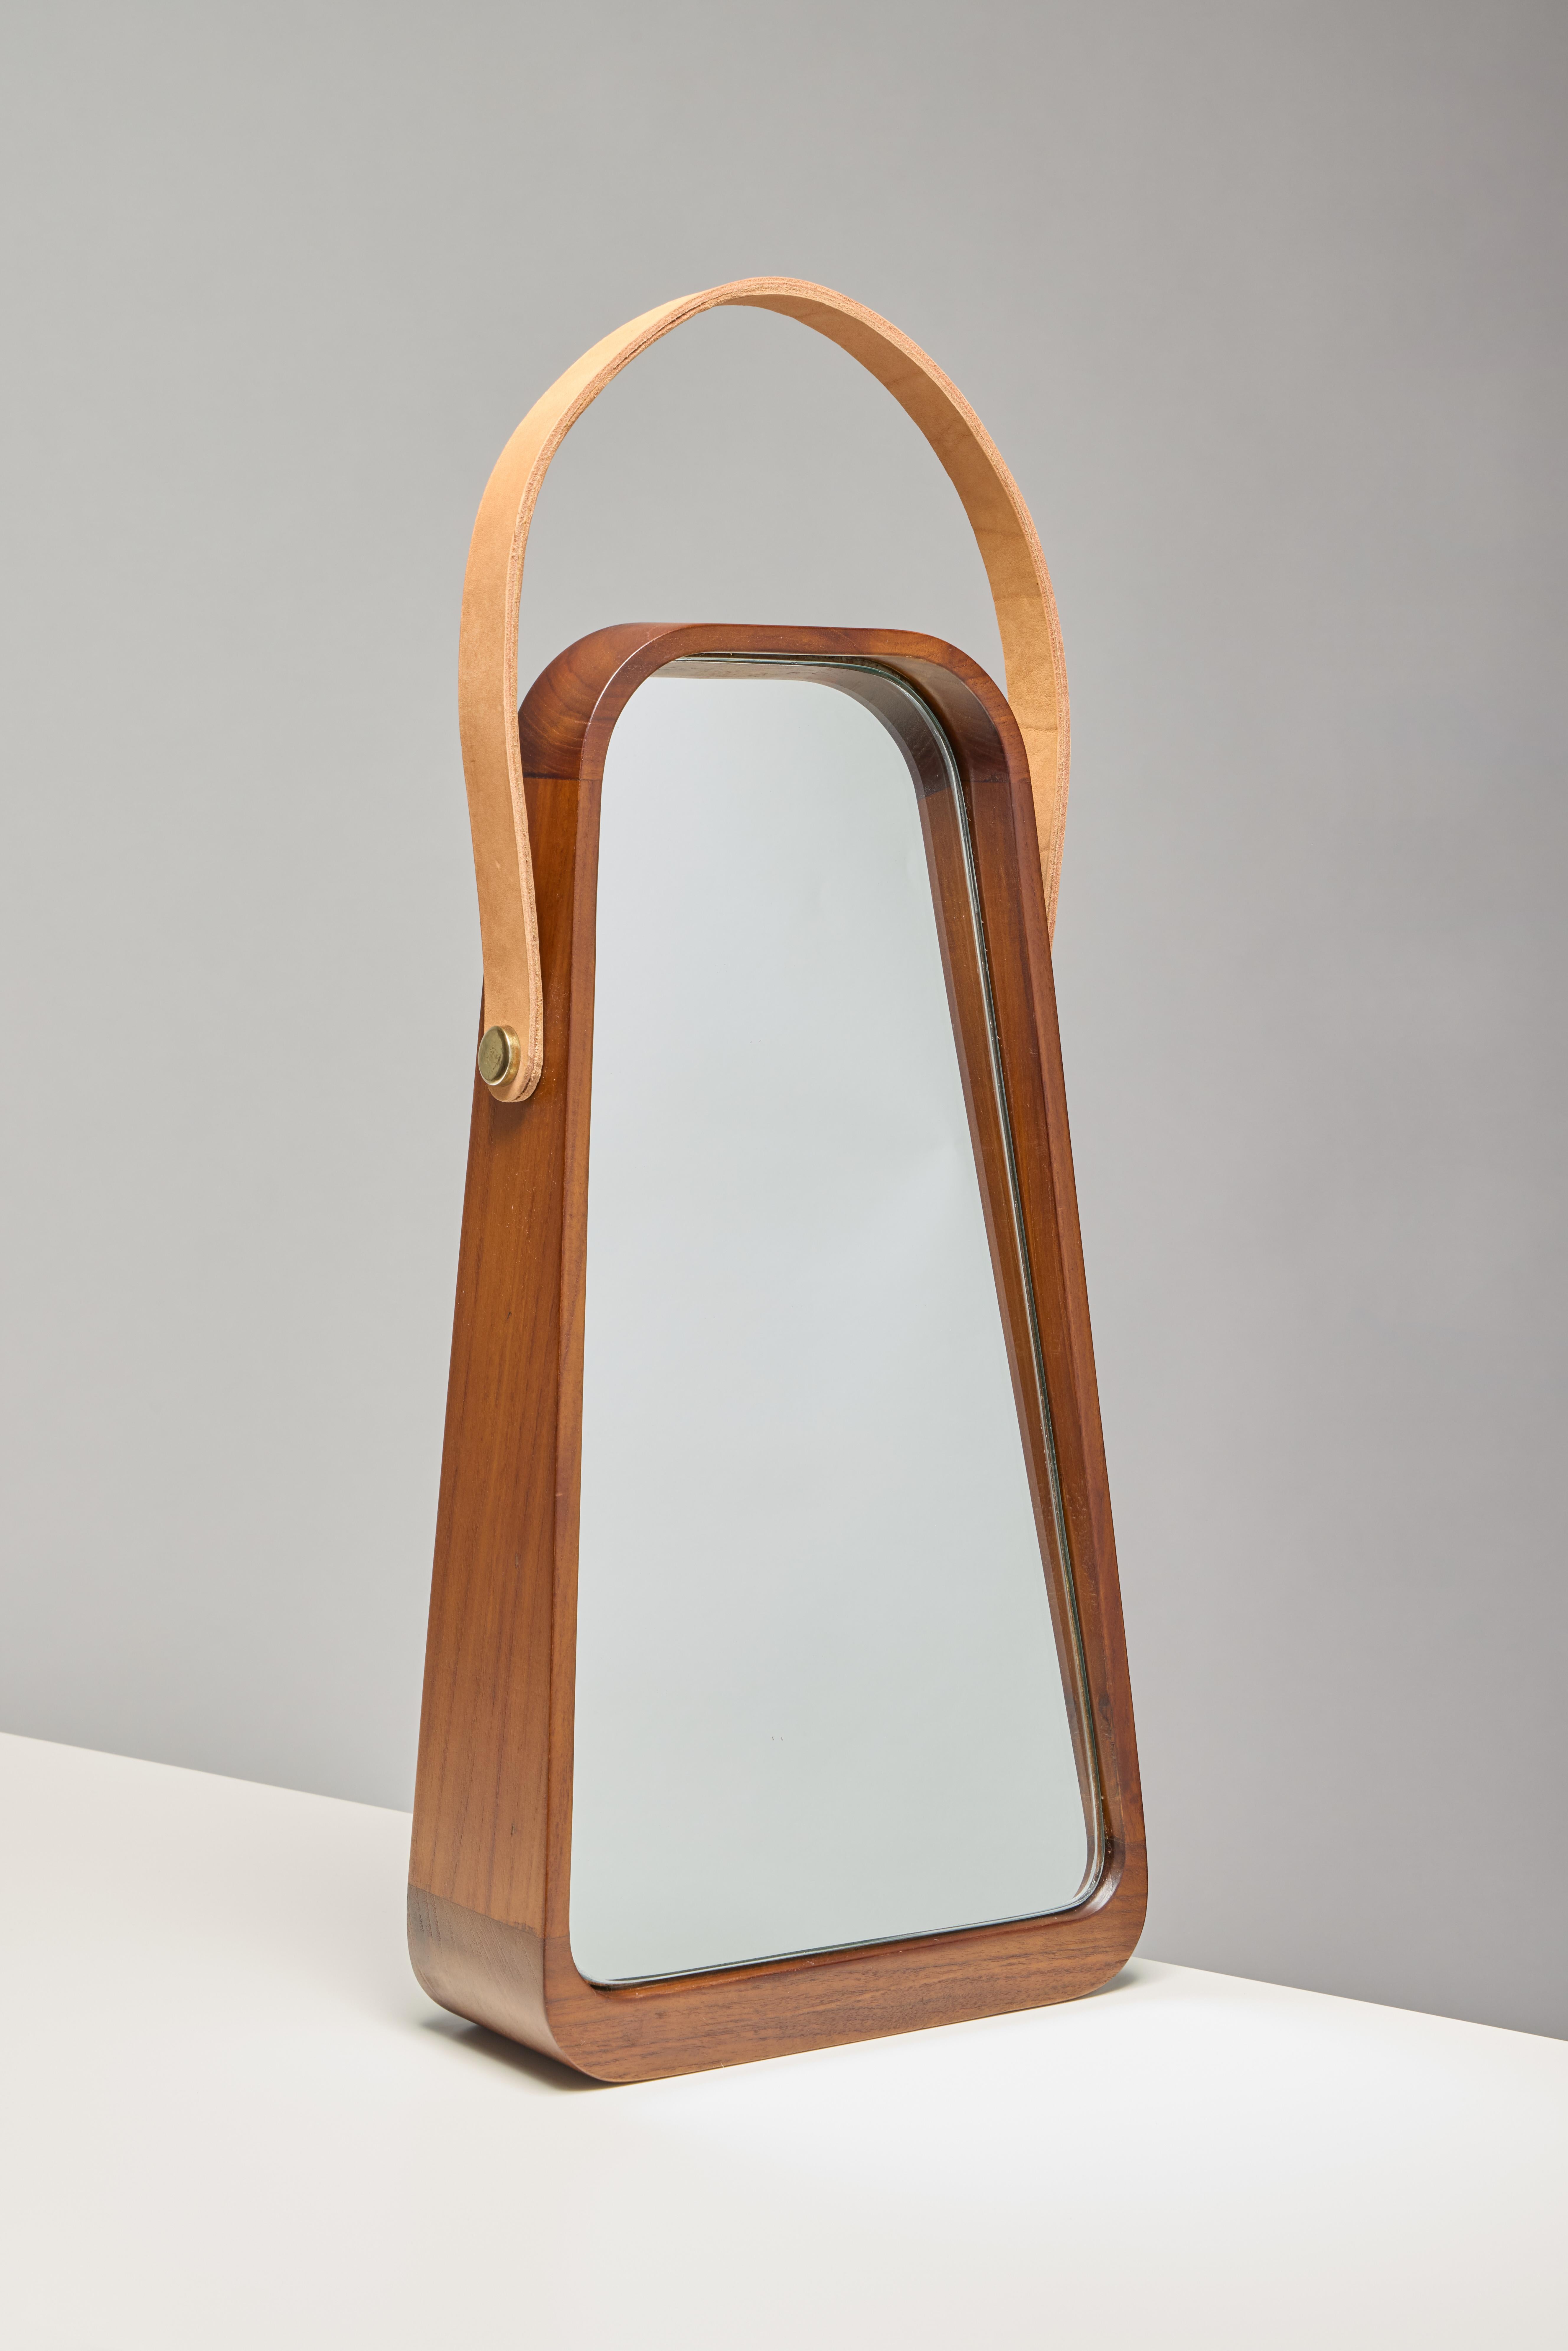 Table mirror. Wood frame and fixed tilted miroir integrated.
Teakwood in Natural waterbase finish.
Mirror glass 5mm / Mirror anse in natural Leather.

Dimensions: 269 x 95/45 x h500 mm

This product is handmade. Each piece is unique, and may vary